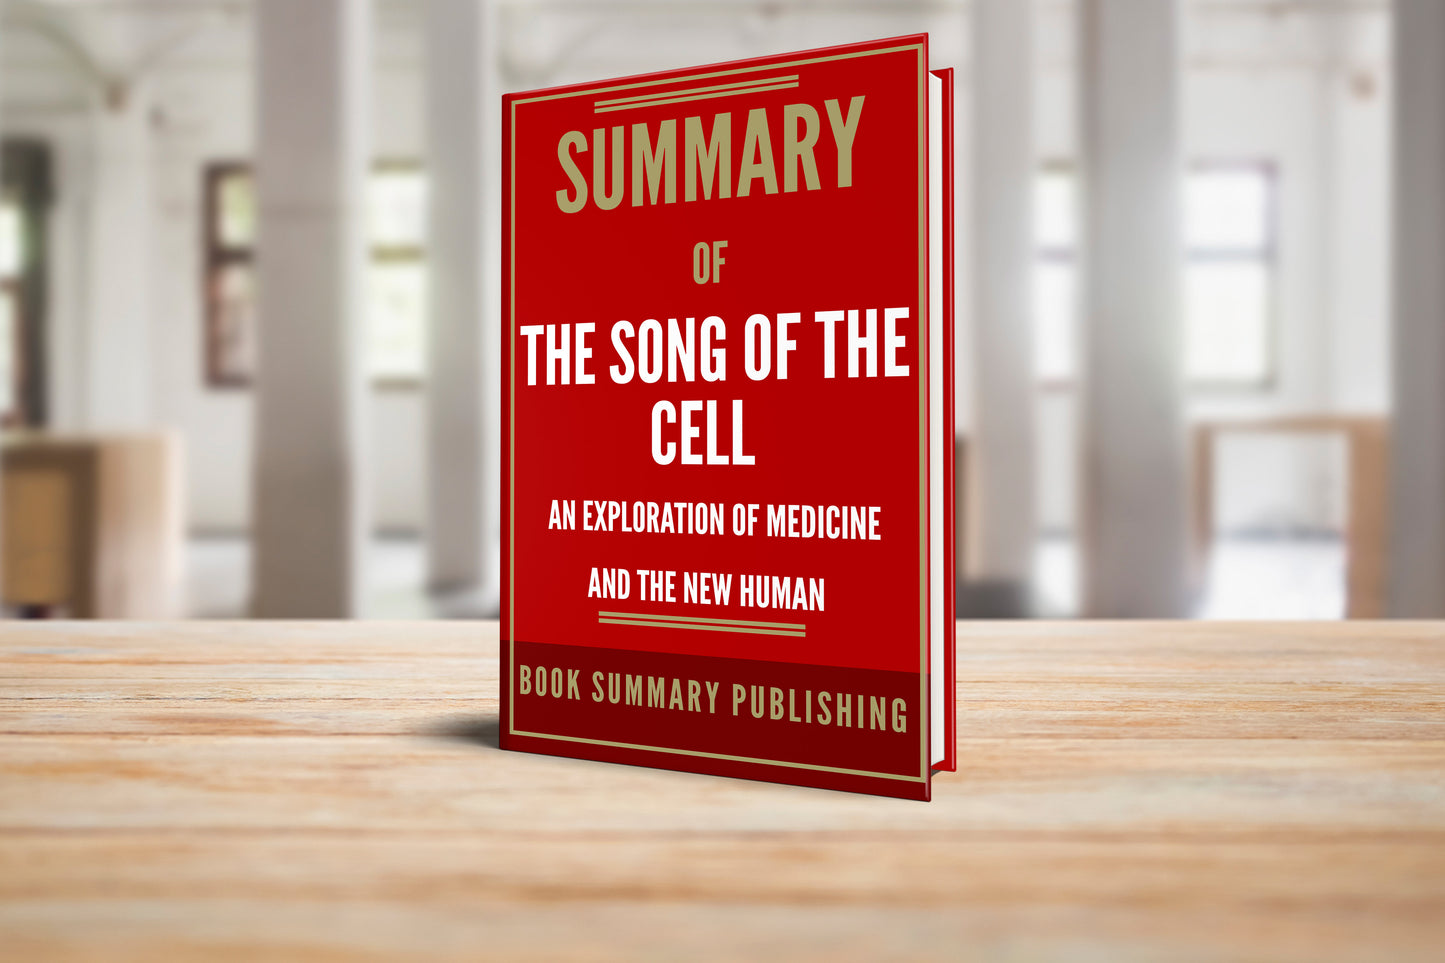 Summary of "The Song of the Cell: An Exploration of Medicine and the New Human"